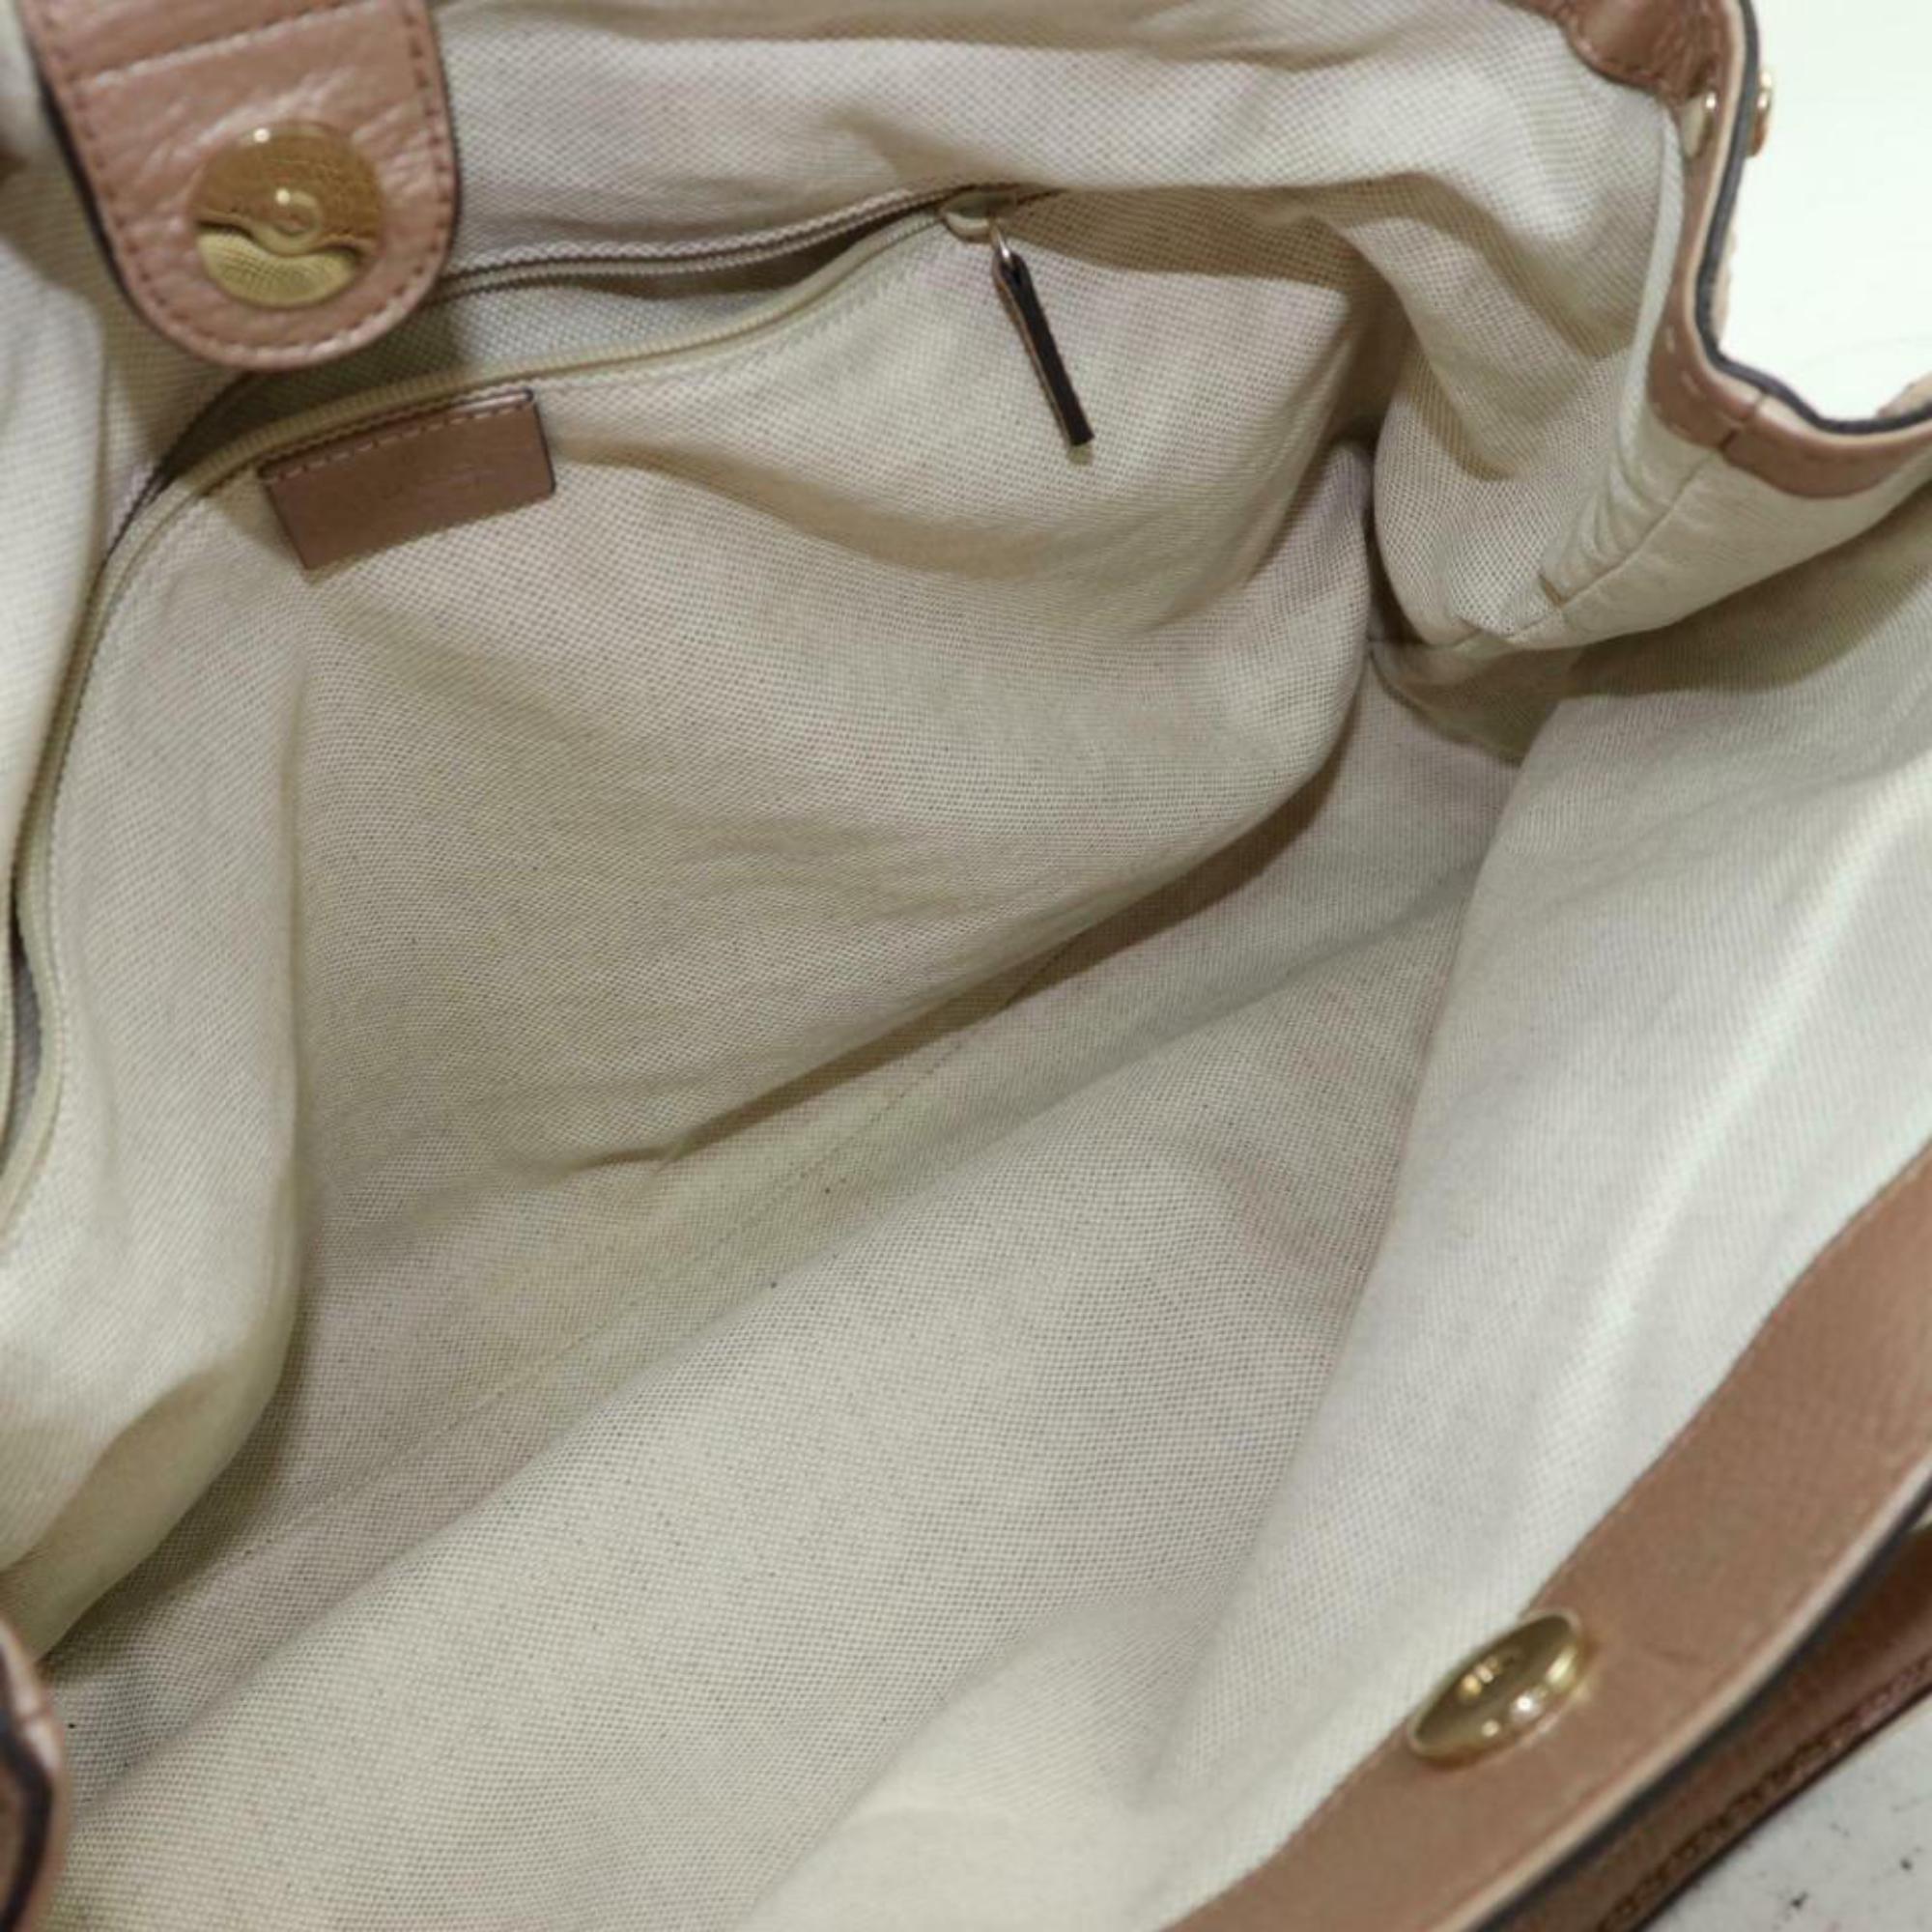 Gucci Sukey Hobo 870327 Beige Leather Satchel For Sale 7